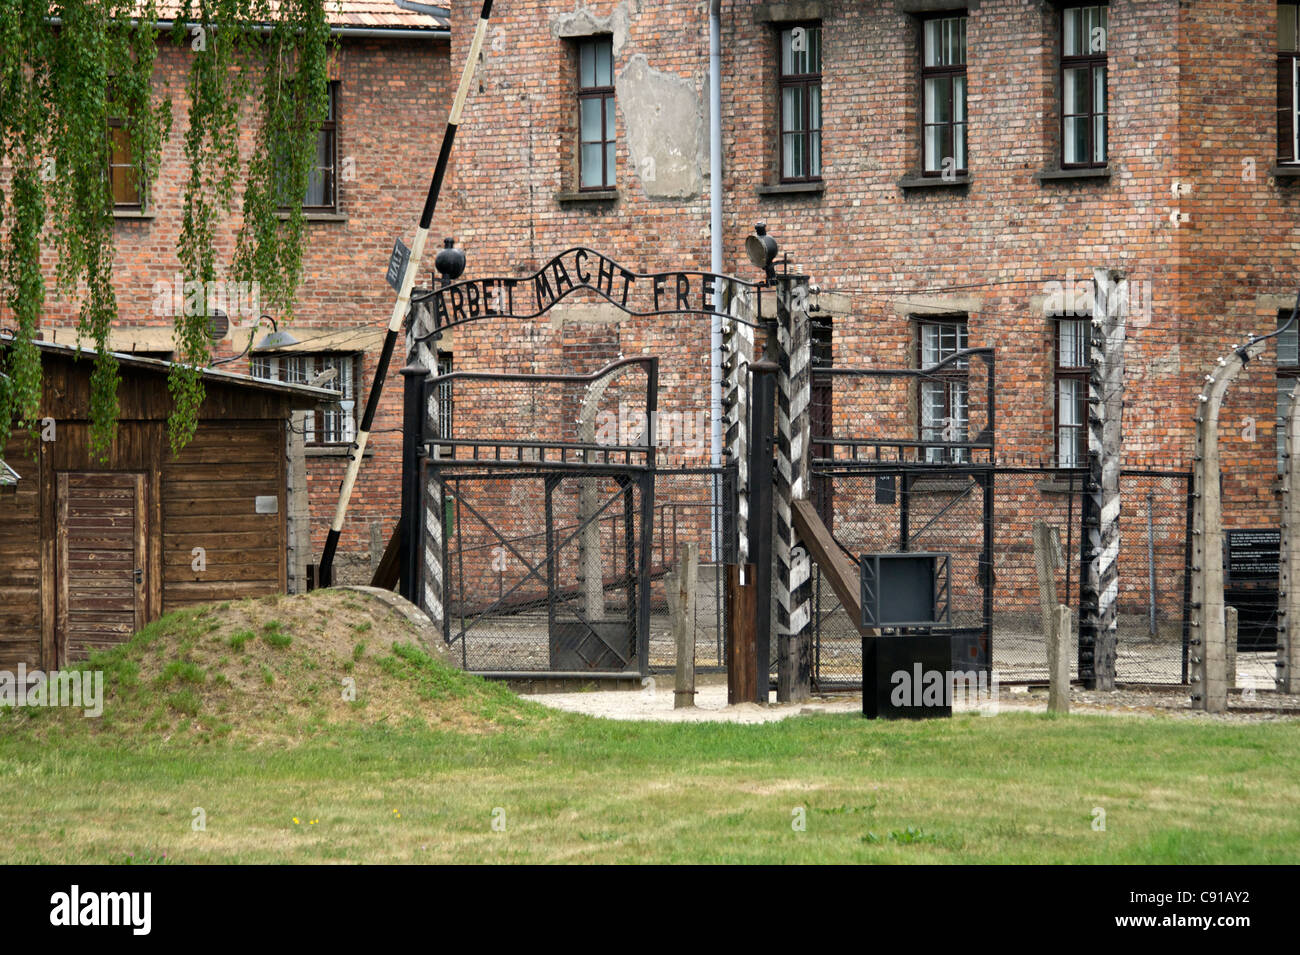 Gate to the entrance of Auschwitz 1 concentration camp with original metal signage 'Arbeit Macht Frei' Work makes you free and Stock Photo